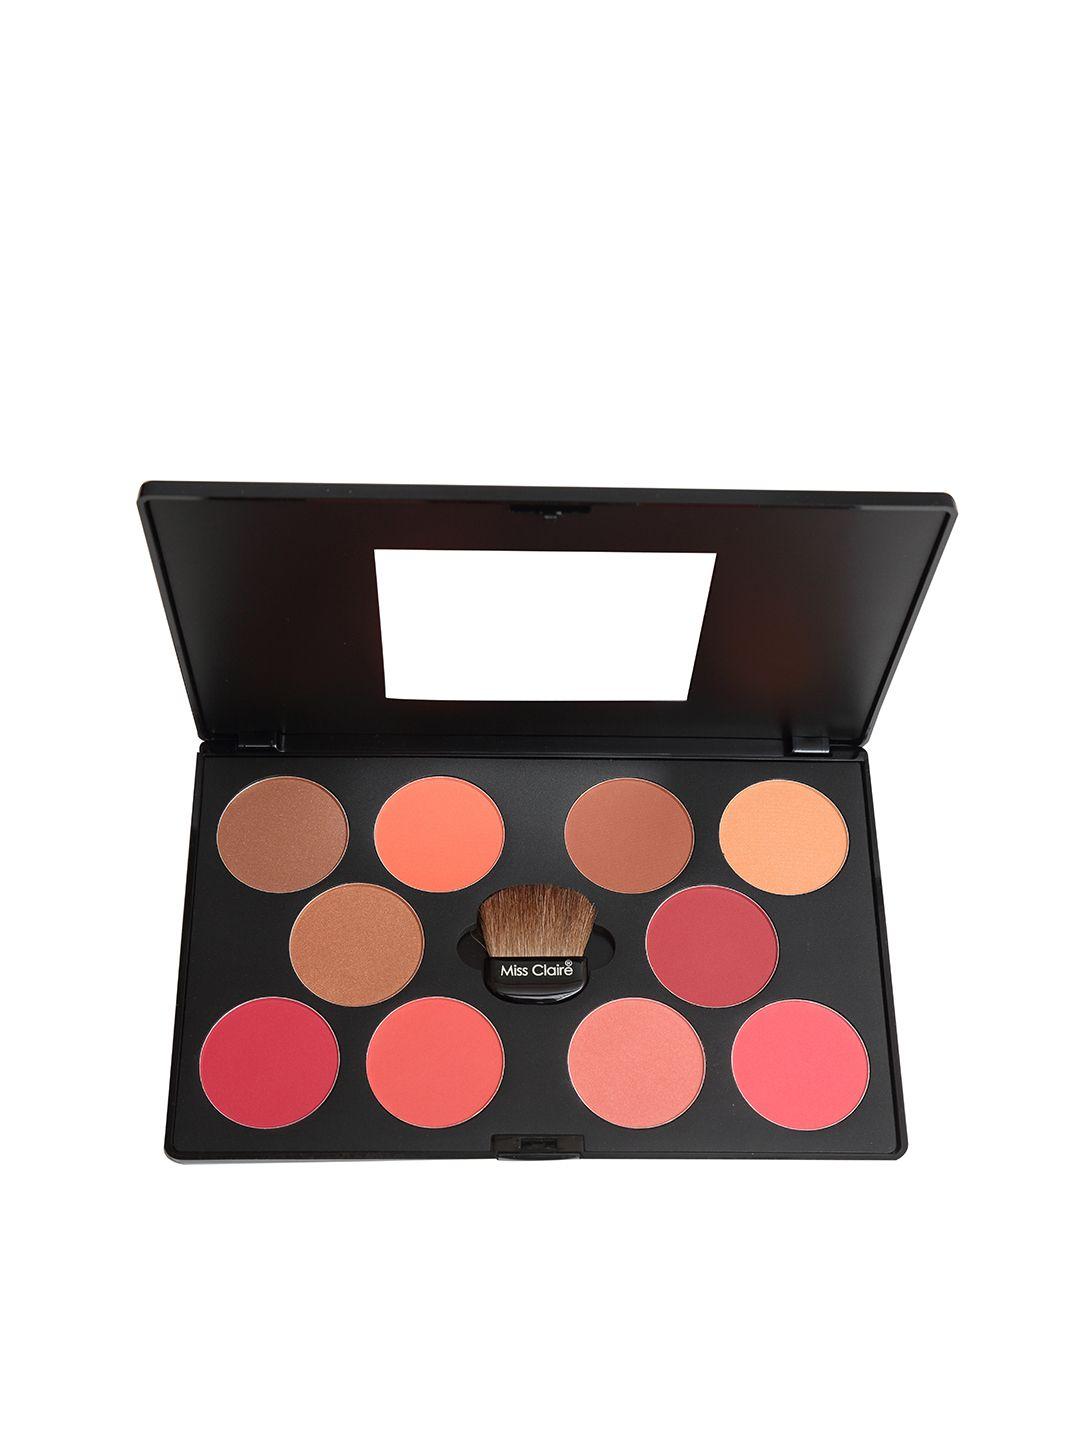 miss-claire-2-professional-blusher-palette-45-g